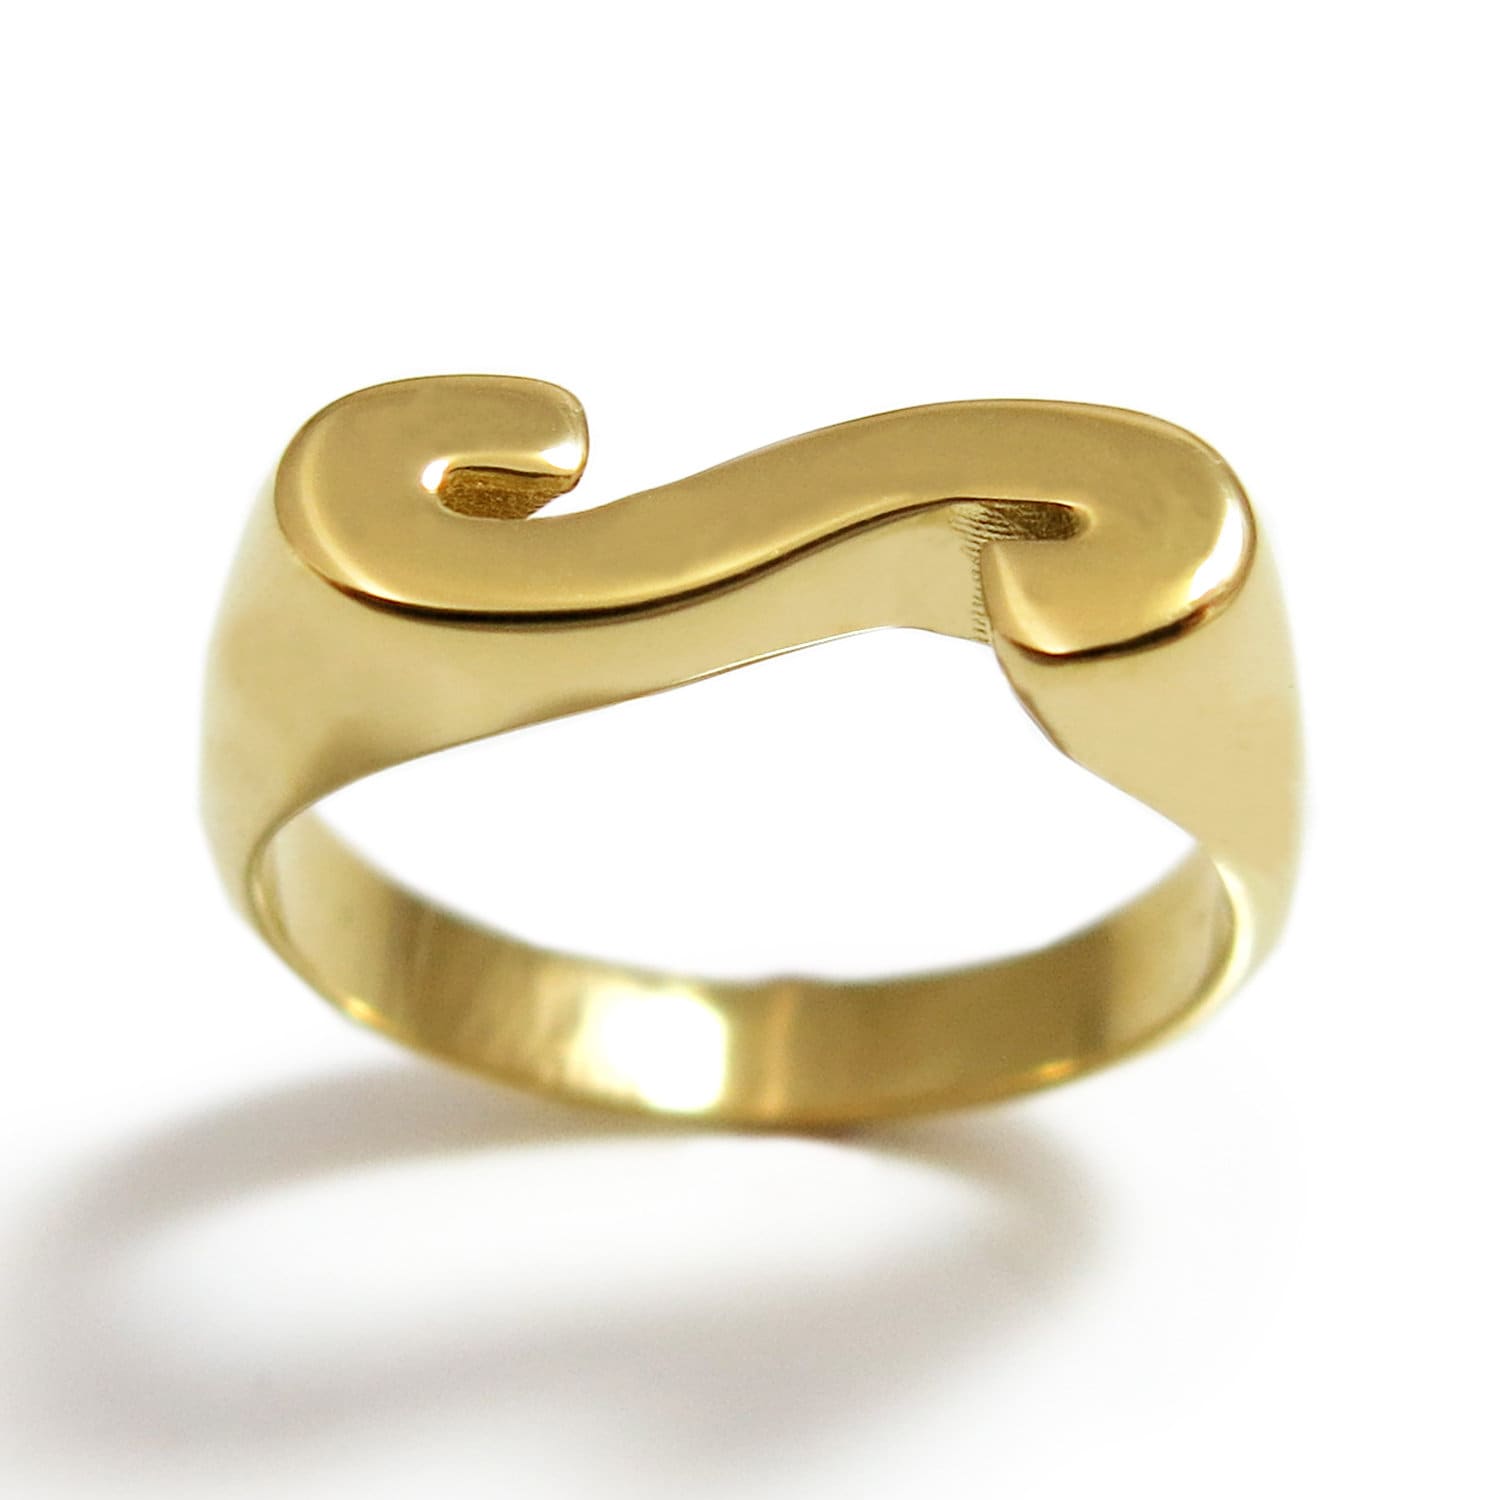 SR ring | Mens ring designs, Couple rings gold, Gold ring designs